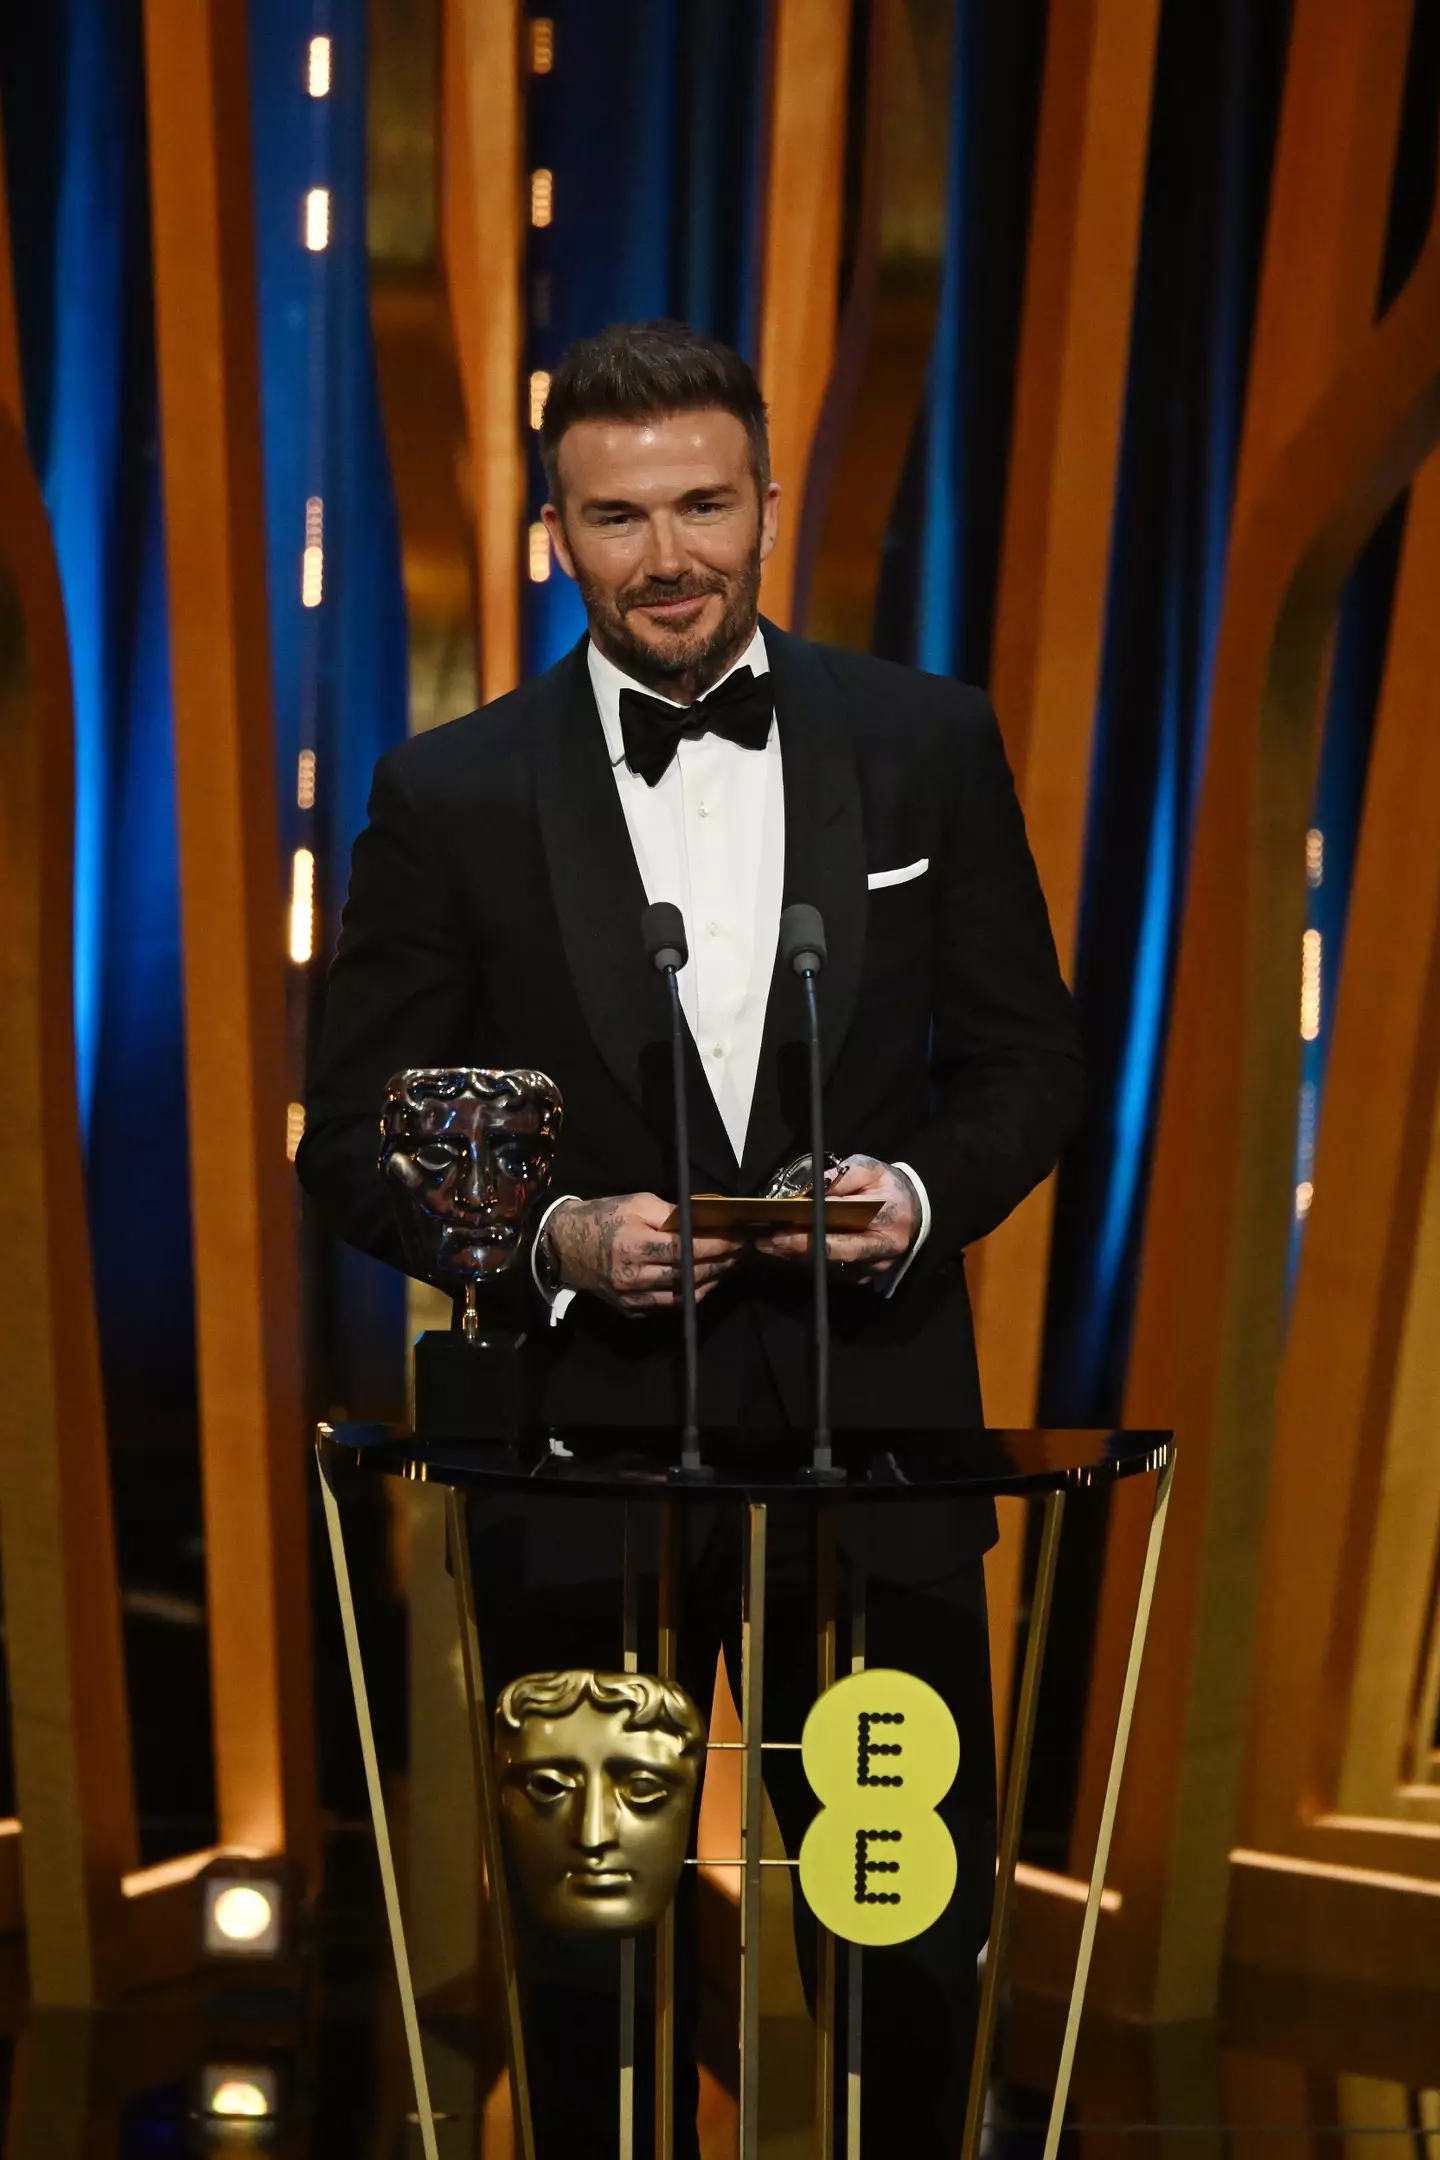 David Beckham was up to present an award at the Baftas, but some disliked his choice of wording.